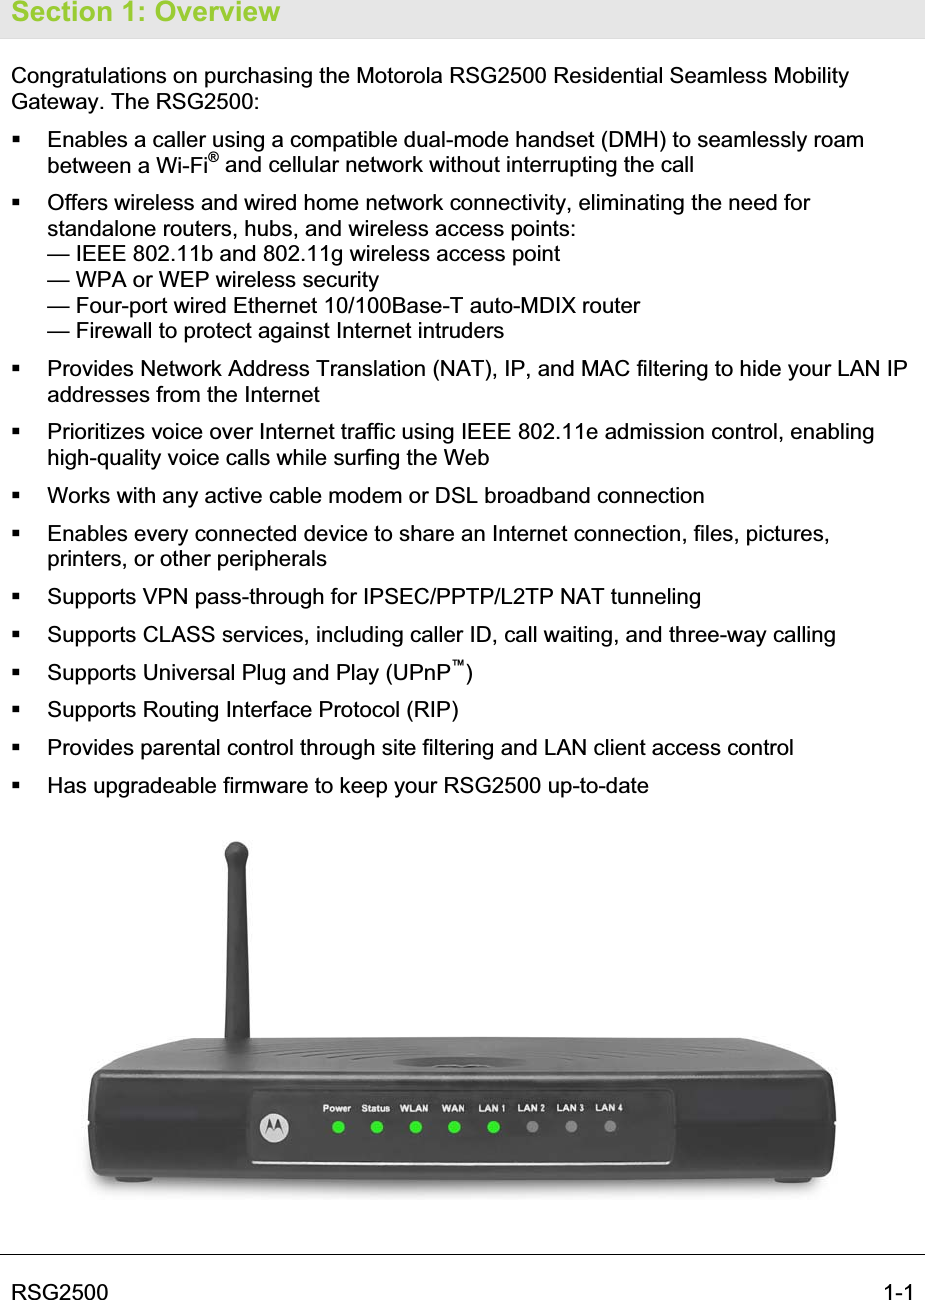 RSG2500    1-1Section 1: Overview Congratulations on purchasing the Motorola RSG2500 Residential Seamless Mobility Gateway. The RSG2500:   Enables a caller using a compatible dual-mode handset (DMH) to seamlessly roam between a Wi-Fi® and cellular network without interrupting the call    Offers wireless and wired home network connectivity, eliminating the need for standalone routers, hubs, and wireless access points: — IEEE 802.11b and 802.11g wireless access point  — WPA or WEP wireless security — Four-port wired Ethernet 10/100Base-T auto-MDIX router — Firewall to protect against Internet intruders   Provides Network Address Translation (NAT), IP, and MAC filtering to hide your LAN IP addresses from the Internet   Prioritizes voice over Internet traffic using IEEE 802.11e admission control, enabling high-quality voice calls while surfing the Web   Works with any active cable modem or DSL broadband connection   Enables every connected device to share an Internet connection, files, pictures, printers, or other peripherals    Supports VPN pass-through for IPSEC/PPTP/L2TP NAT tunneling    Supports CLASS services, including caller ID, call waiting, and three-way calling   Supports Universal Plug and Play (UPnP™)  Supports Routing Interface Protocol (RIP)   Provides parental control through site filtering and LAN client access control   Has upgradeable firmware to keep your RSG2500 up-to-date 